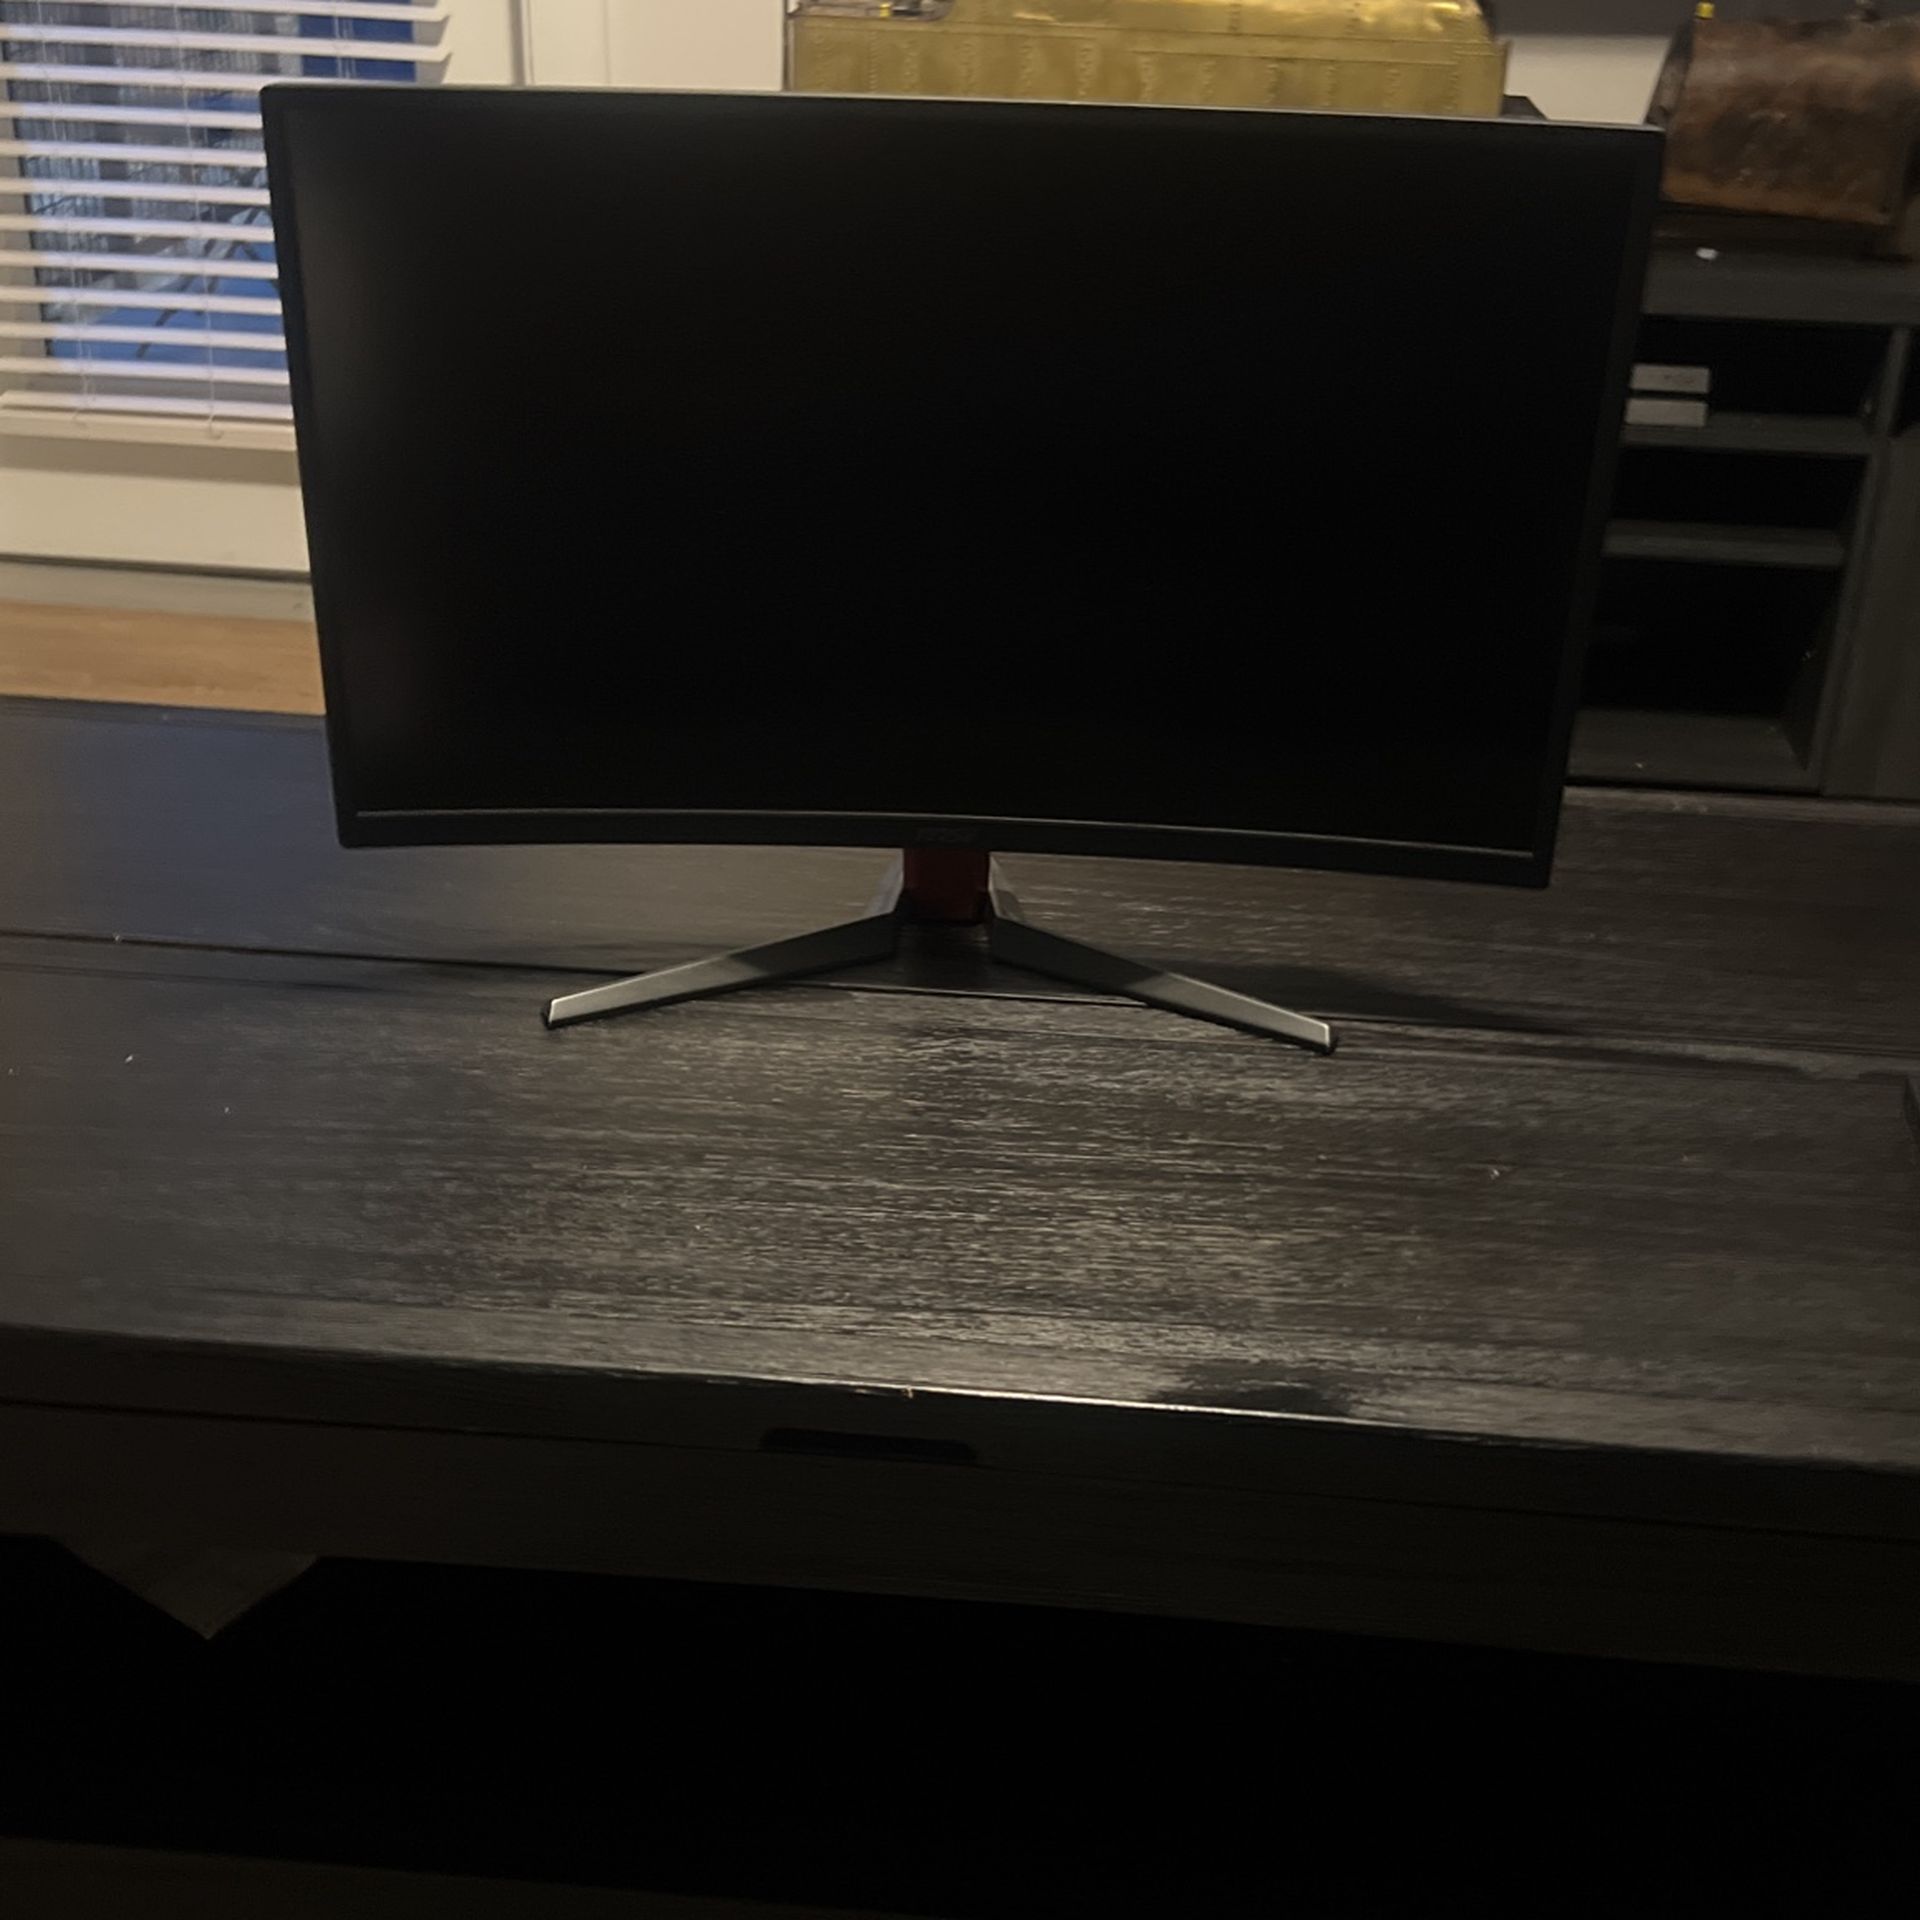 MSI G27C2 27" 1920x1080 1ms 144Hz Curved Monitor